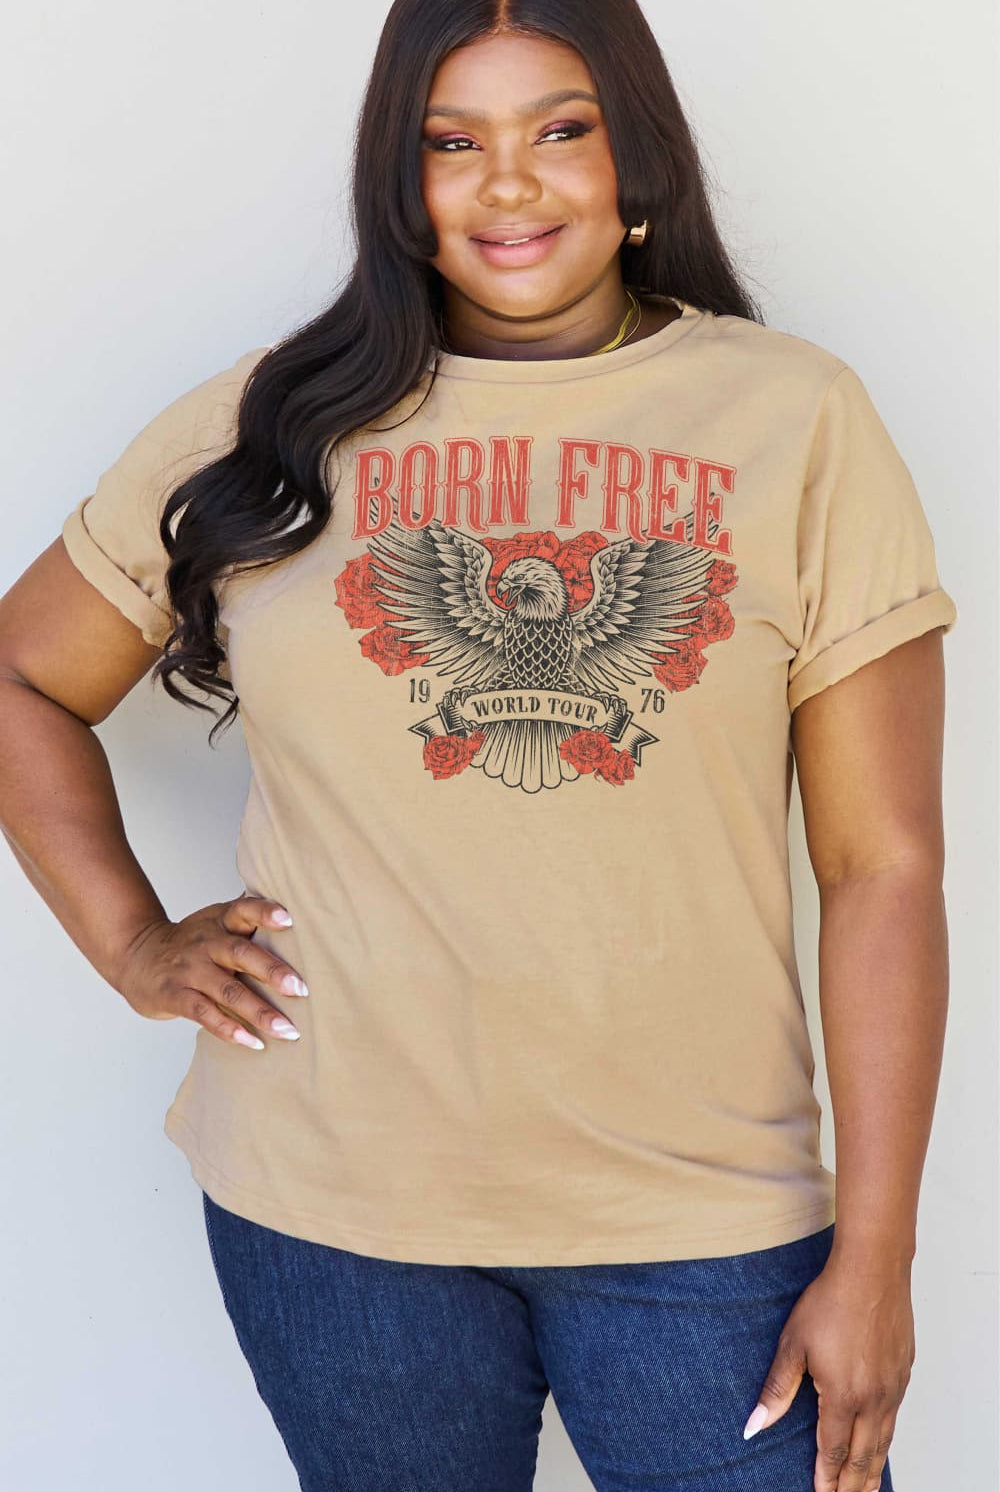 Tan Simply Love Full Size BORN FREE 1976 WORLD TOUR Graphic Cotton T-Shirt Graphic Tees